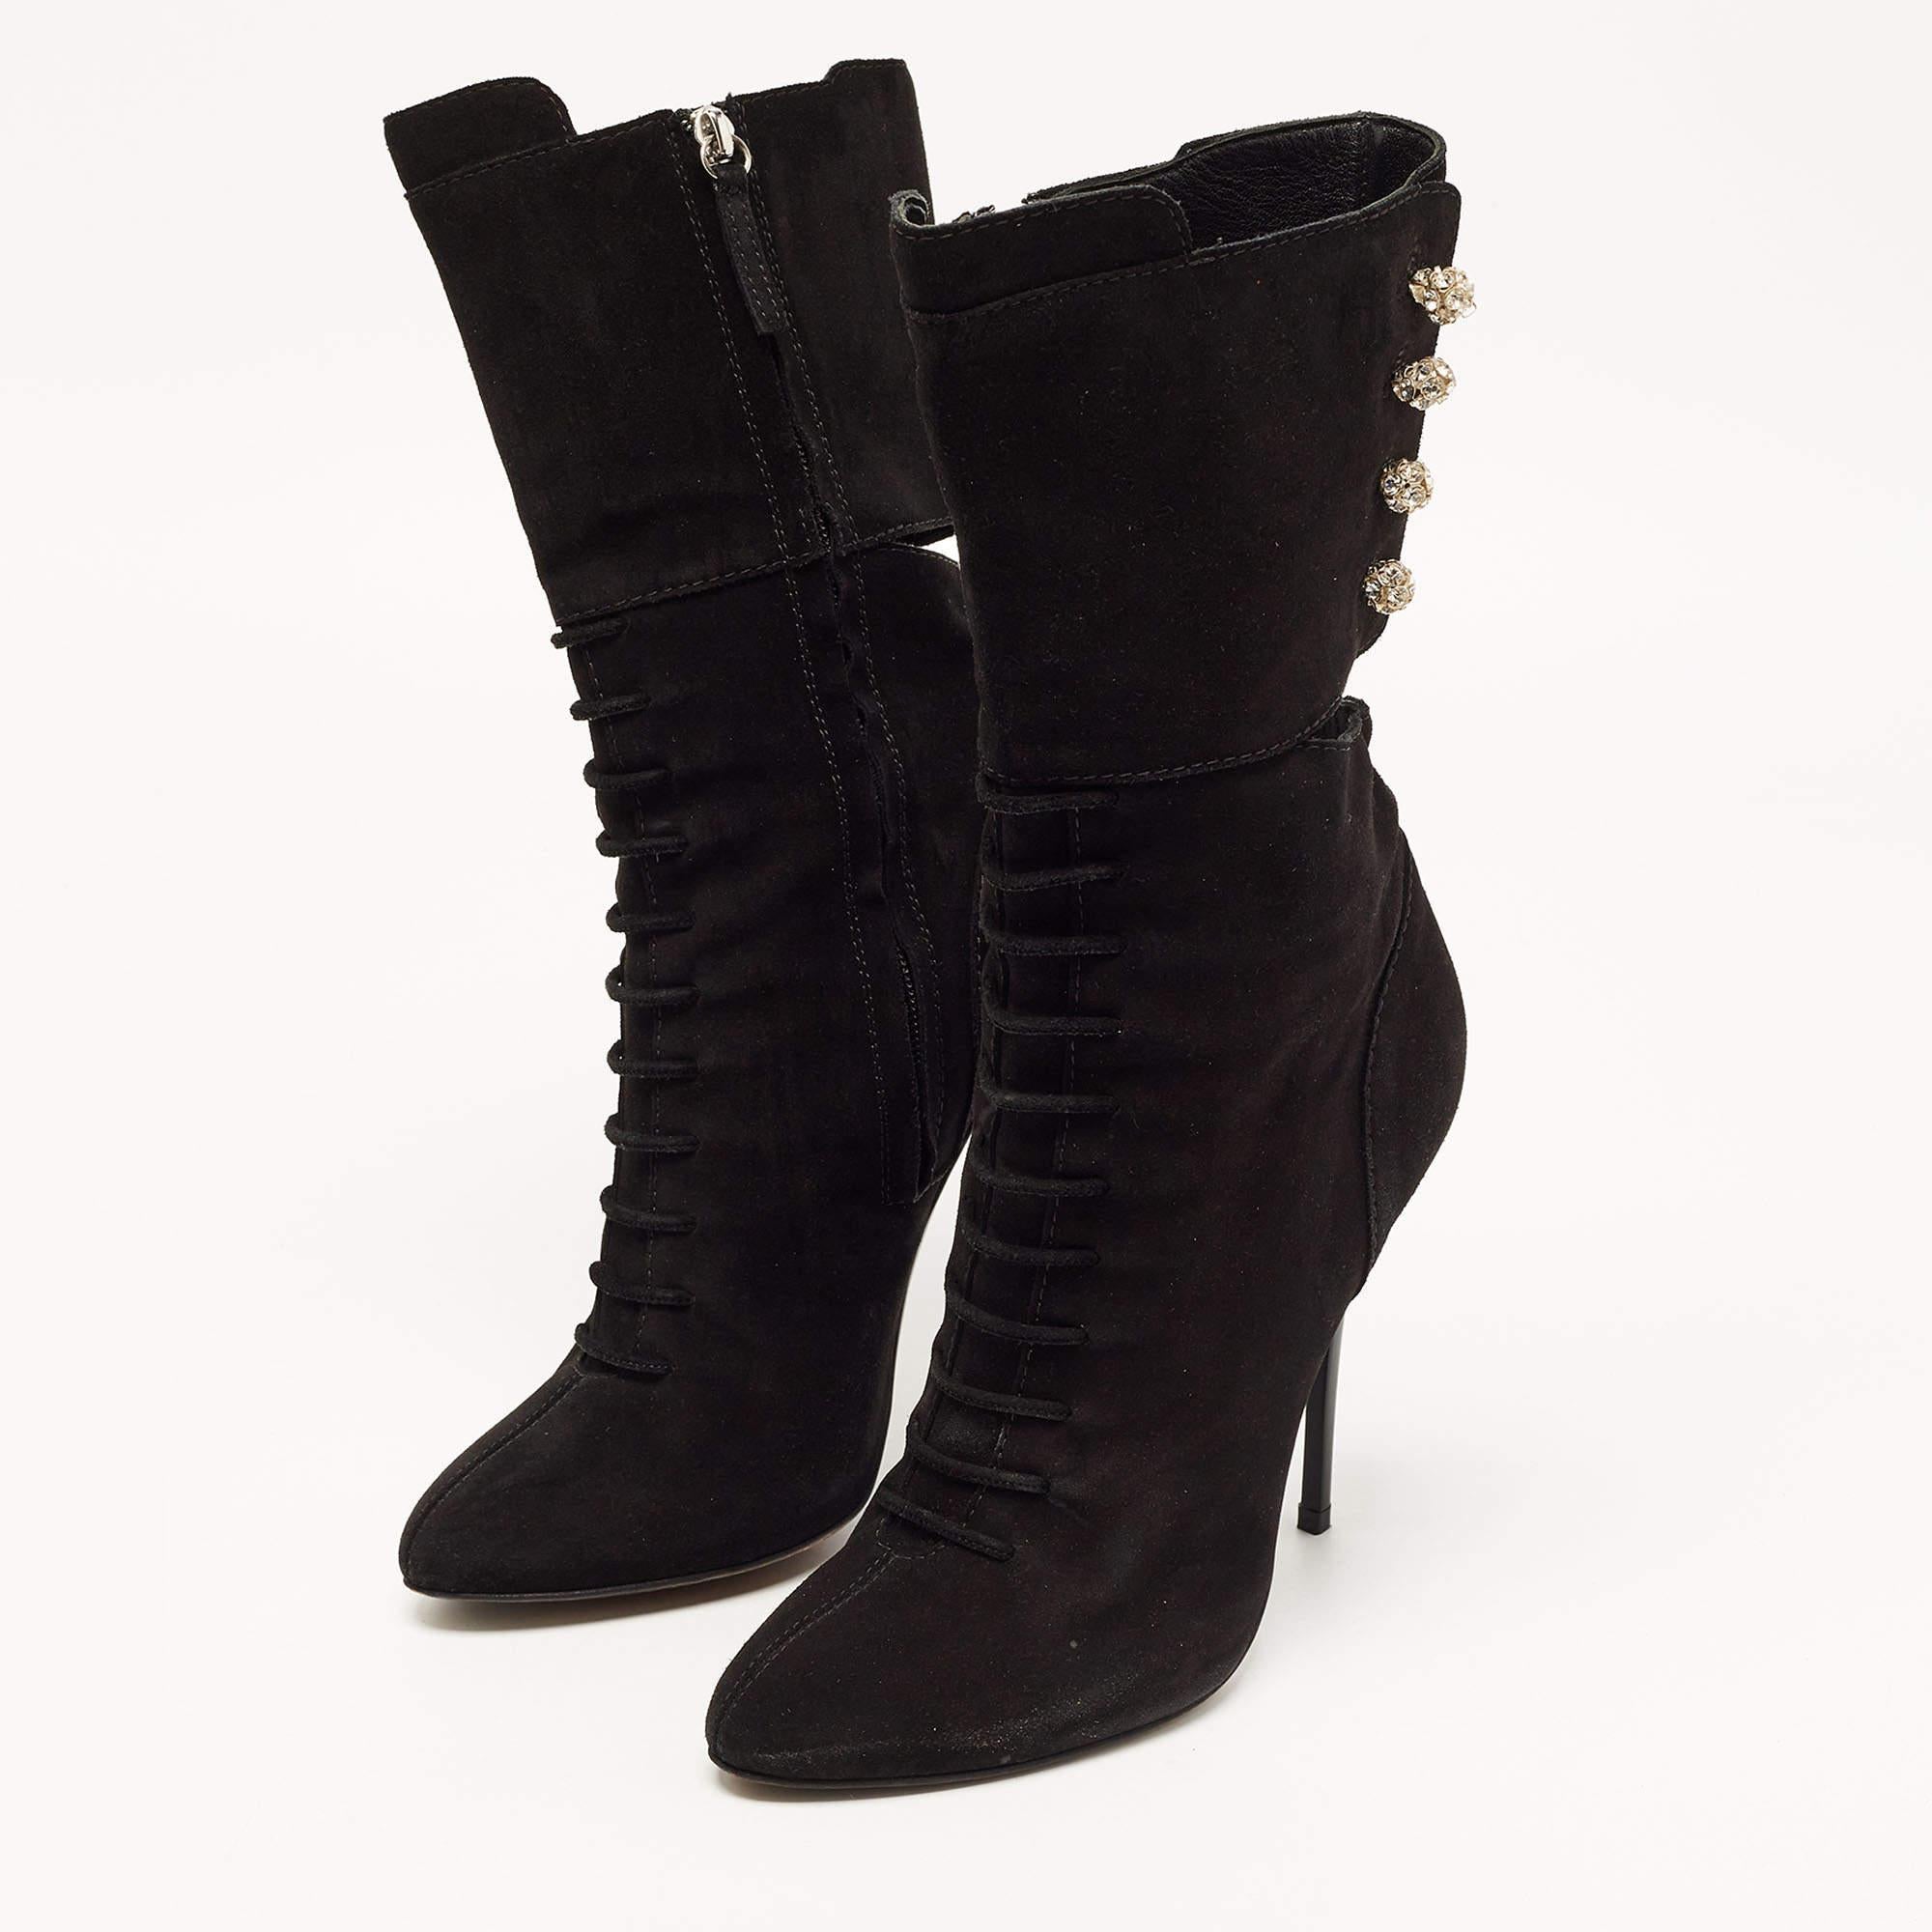 Giuseppe Zanotti Black Suede Crystals Embellished Mid Calf Boots Size 40 For Sale 2